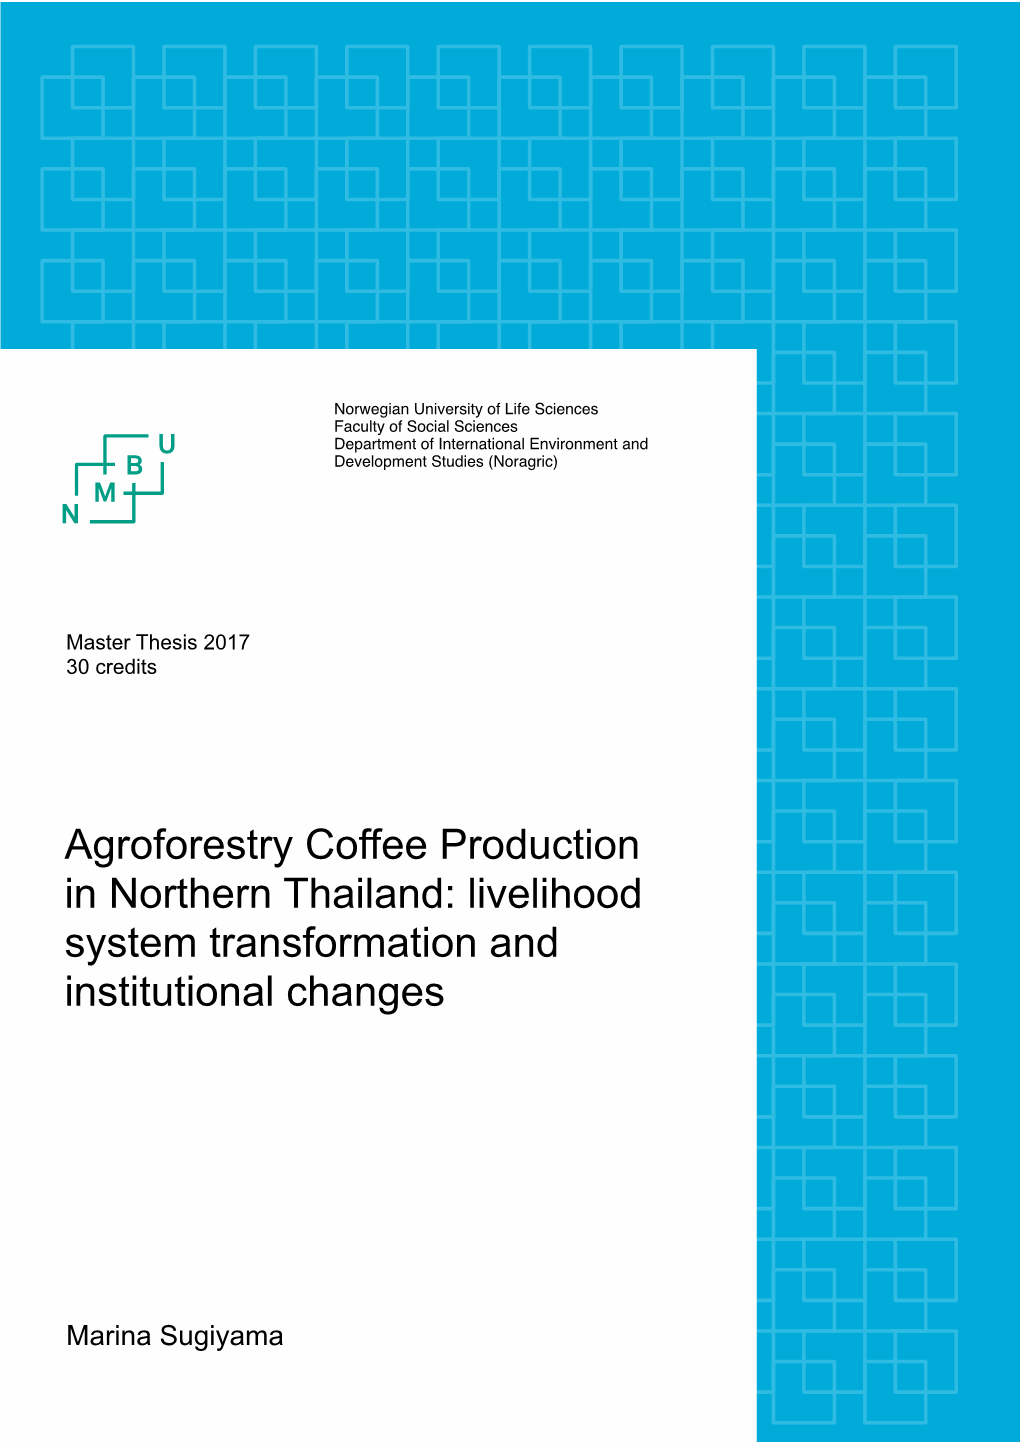 Agroforestry Coffee Production in Northern Thailand: Livelihood System Transformation and Institutional Changes